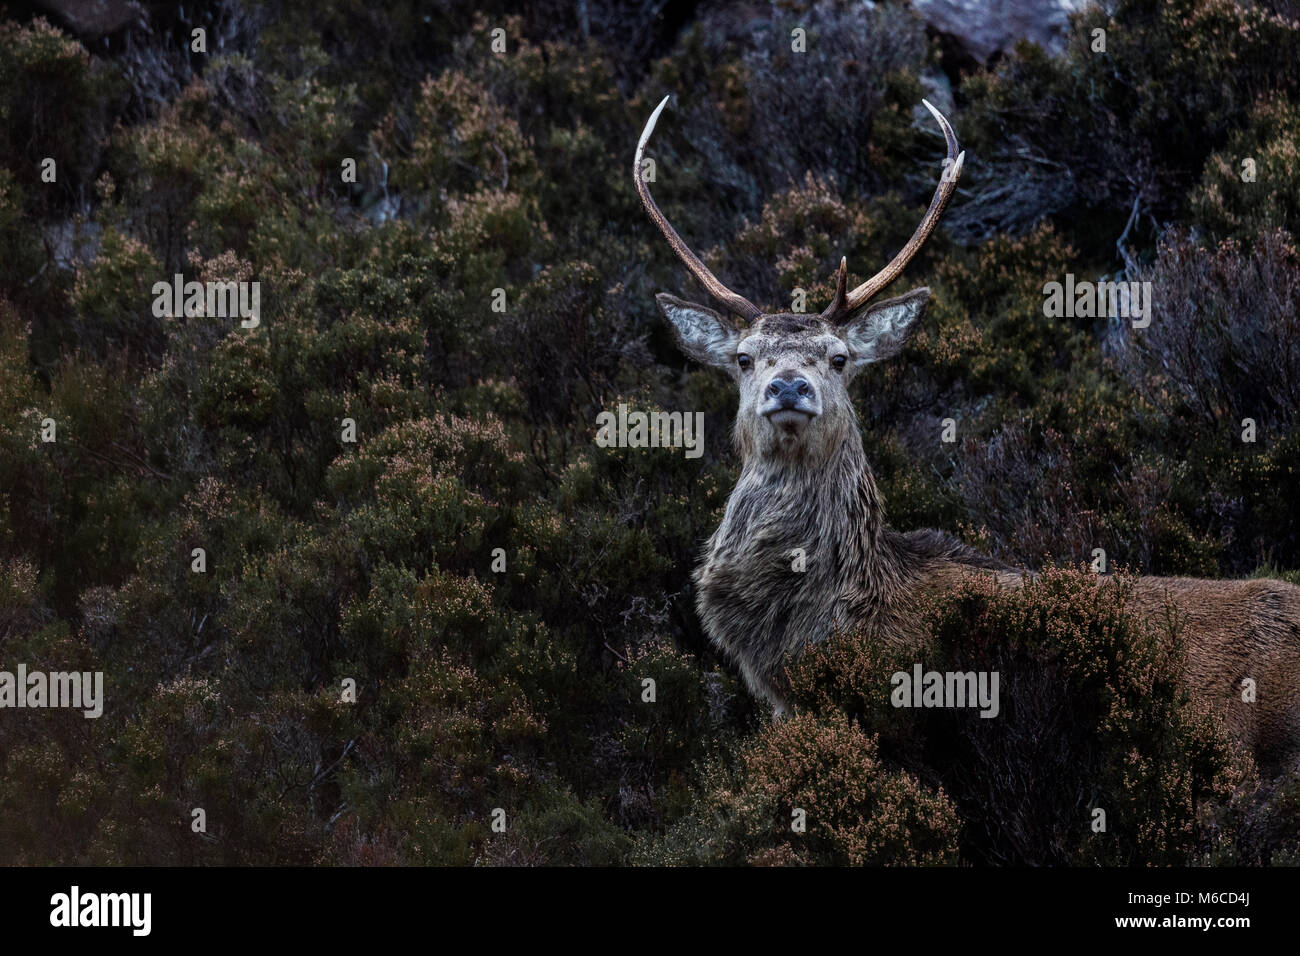 Red Deer stag, Marchin, Ecosse Banque D'Images